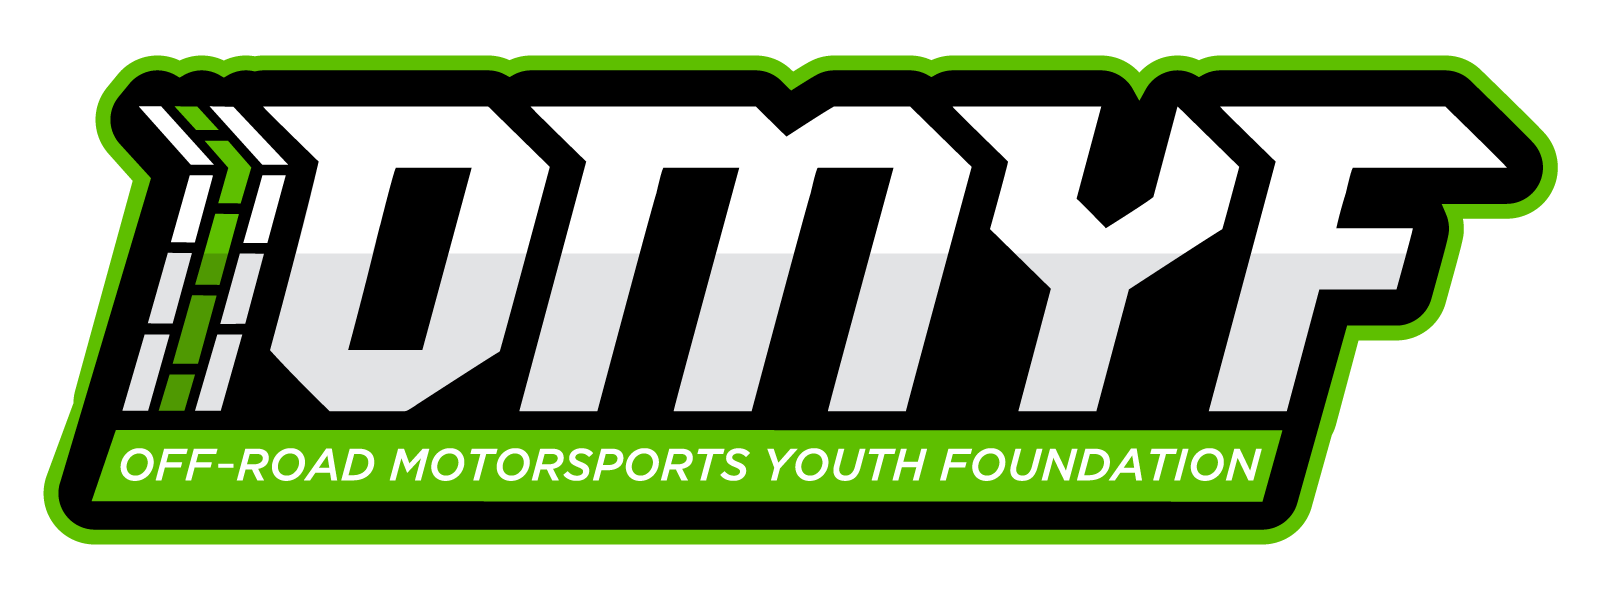 Off-Road Motorsports Youth Foundation